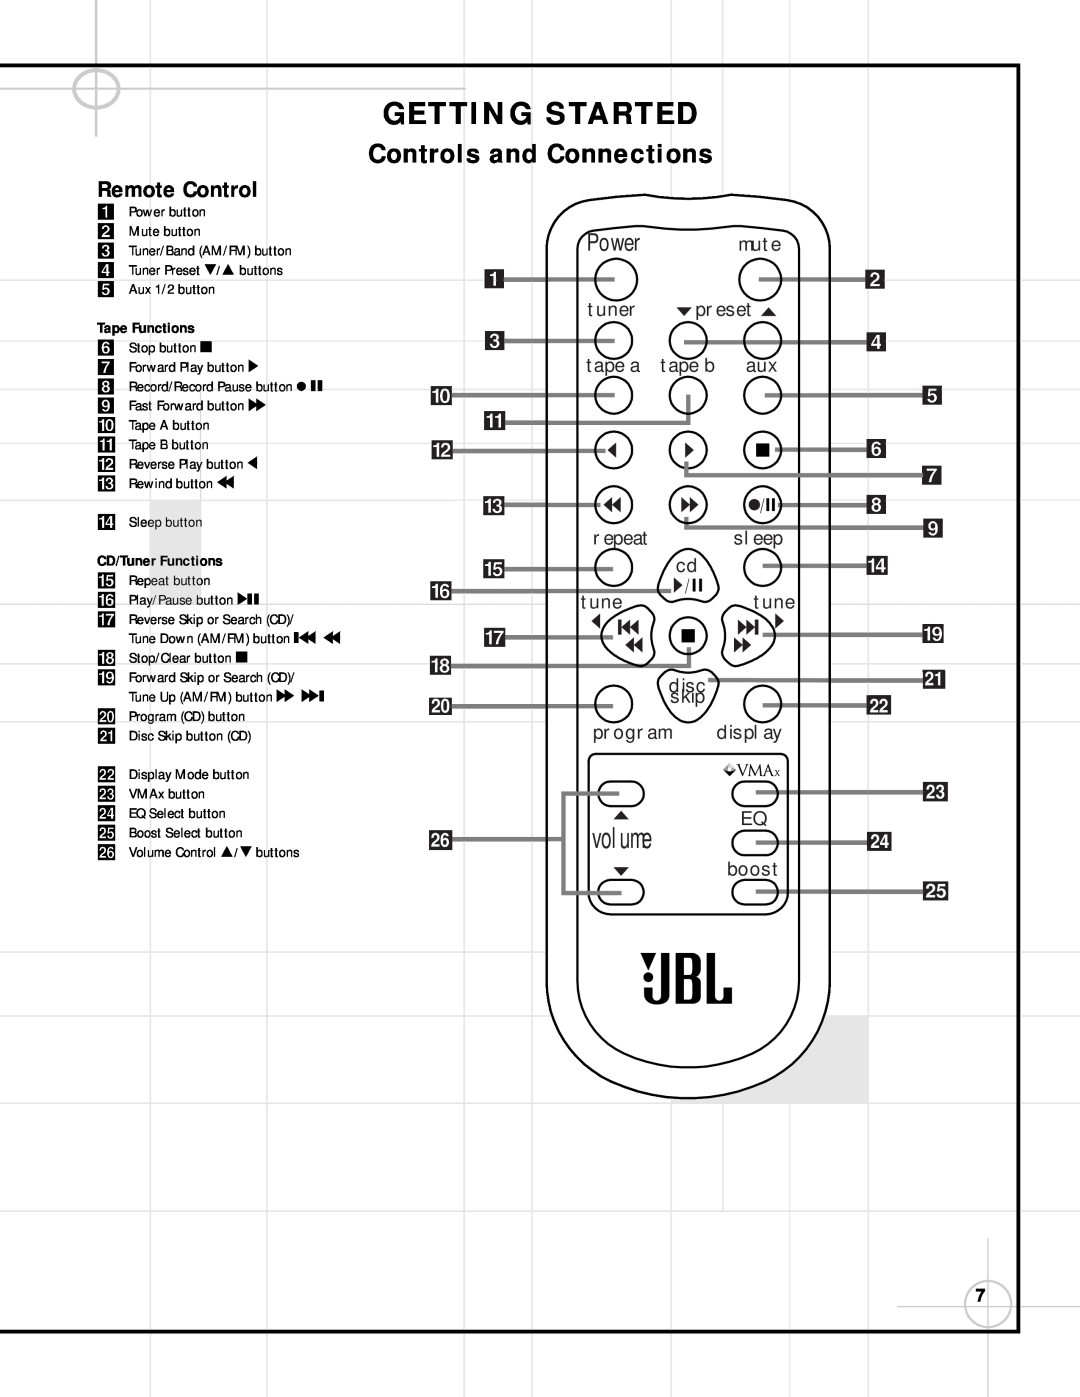 JBL SG2020, SG3030 manual Remote Control, Getting Started, Controls and Connections, Power, volume 